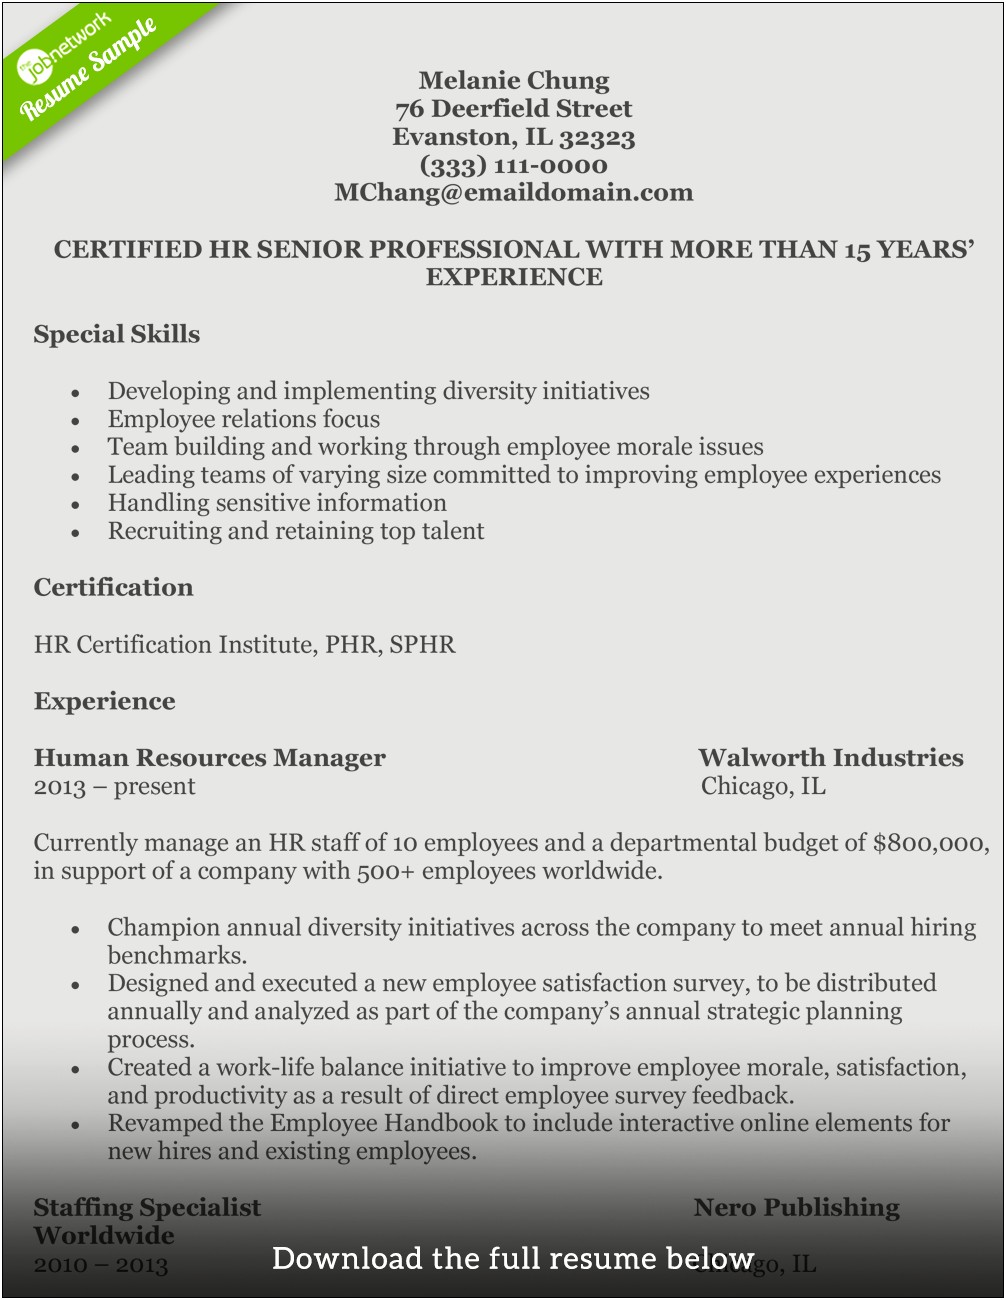 Functional Resume For Human Resources Manager